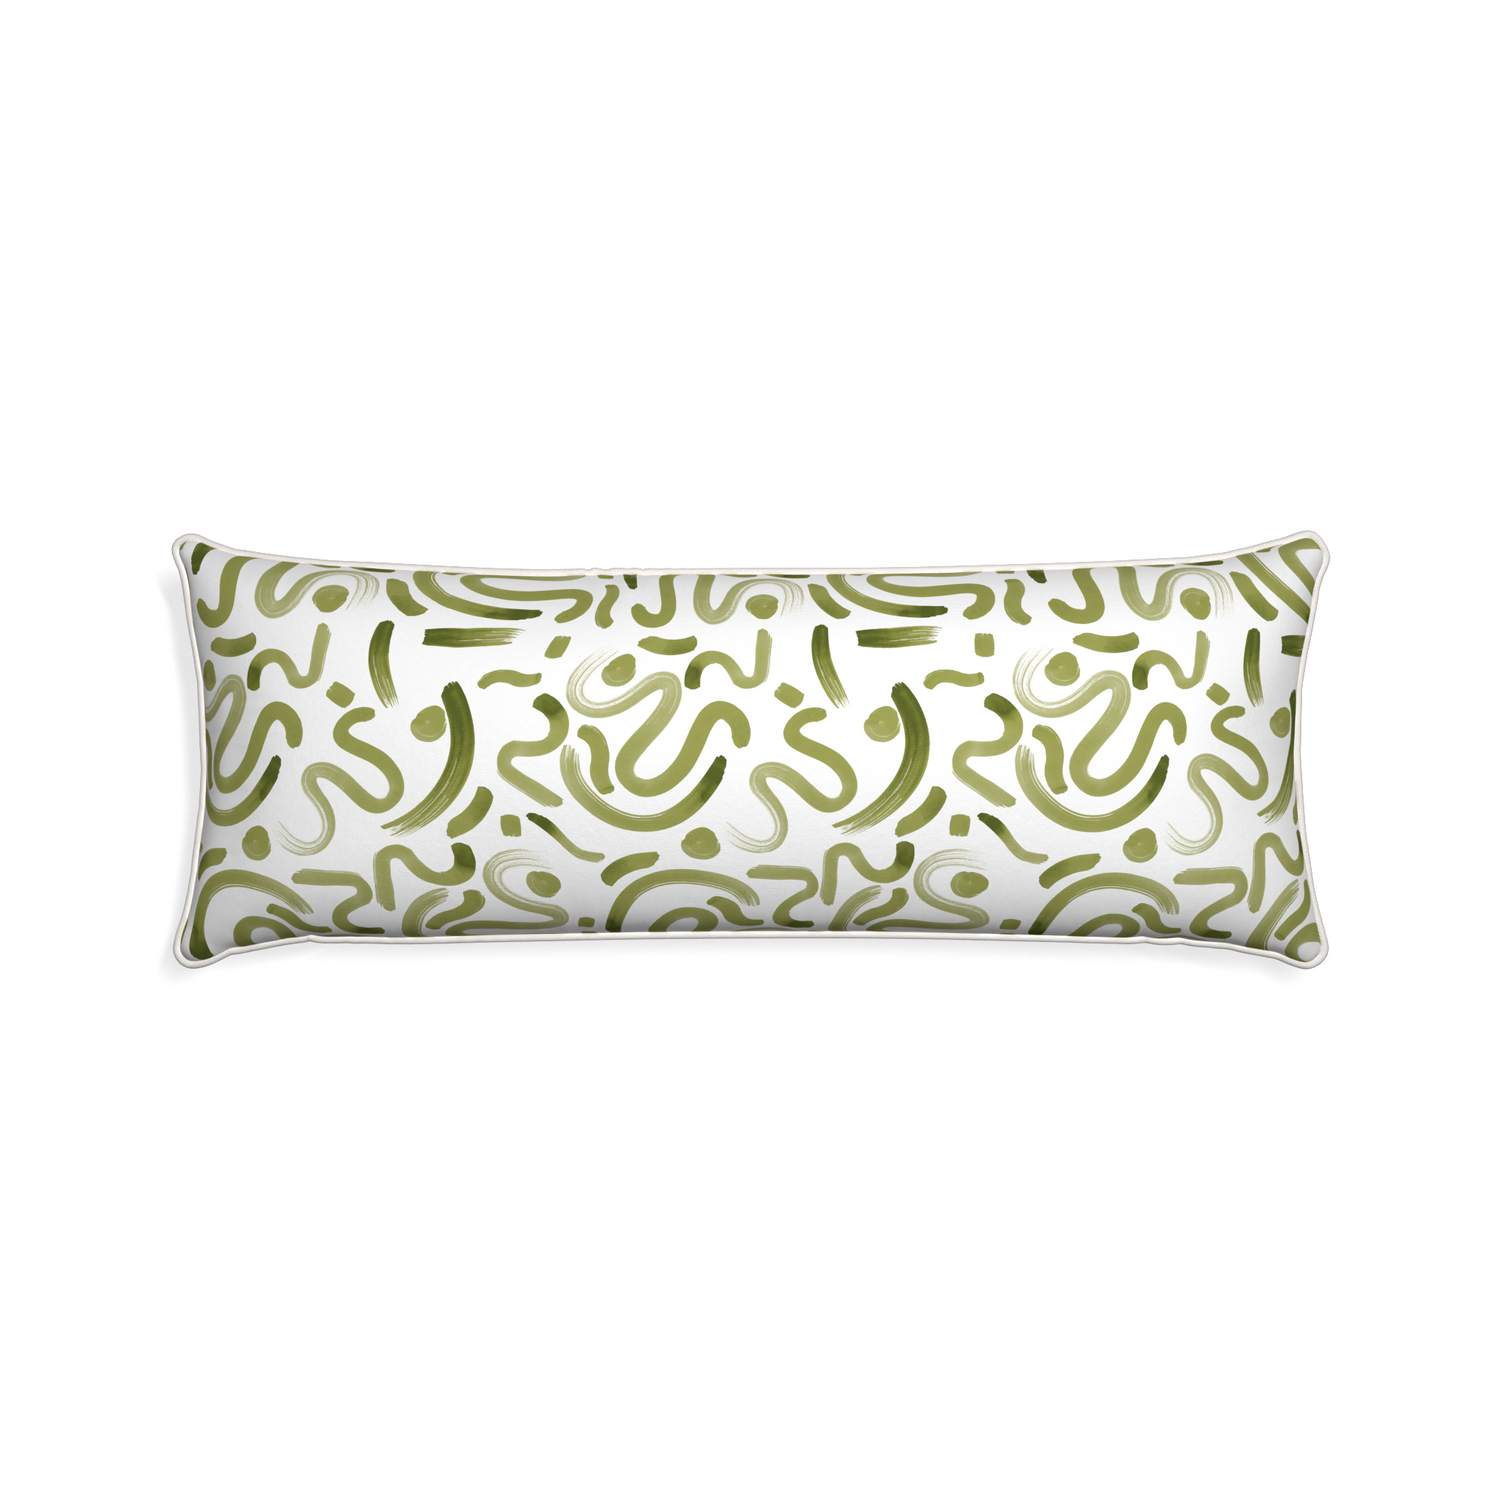 Xl-lumbar hockney moss custom moss greenpillow with snow piping on white background